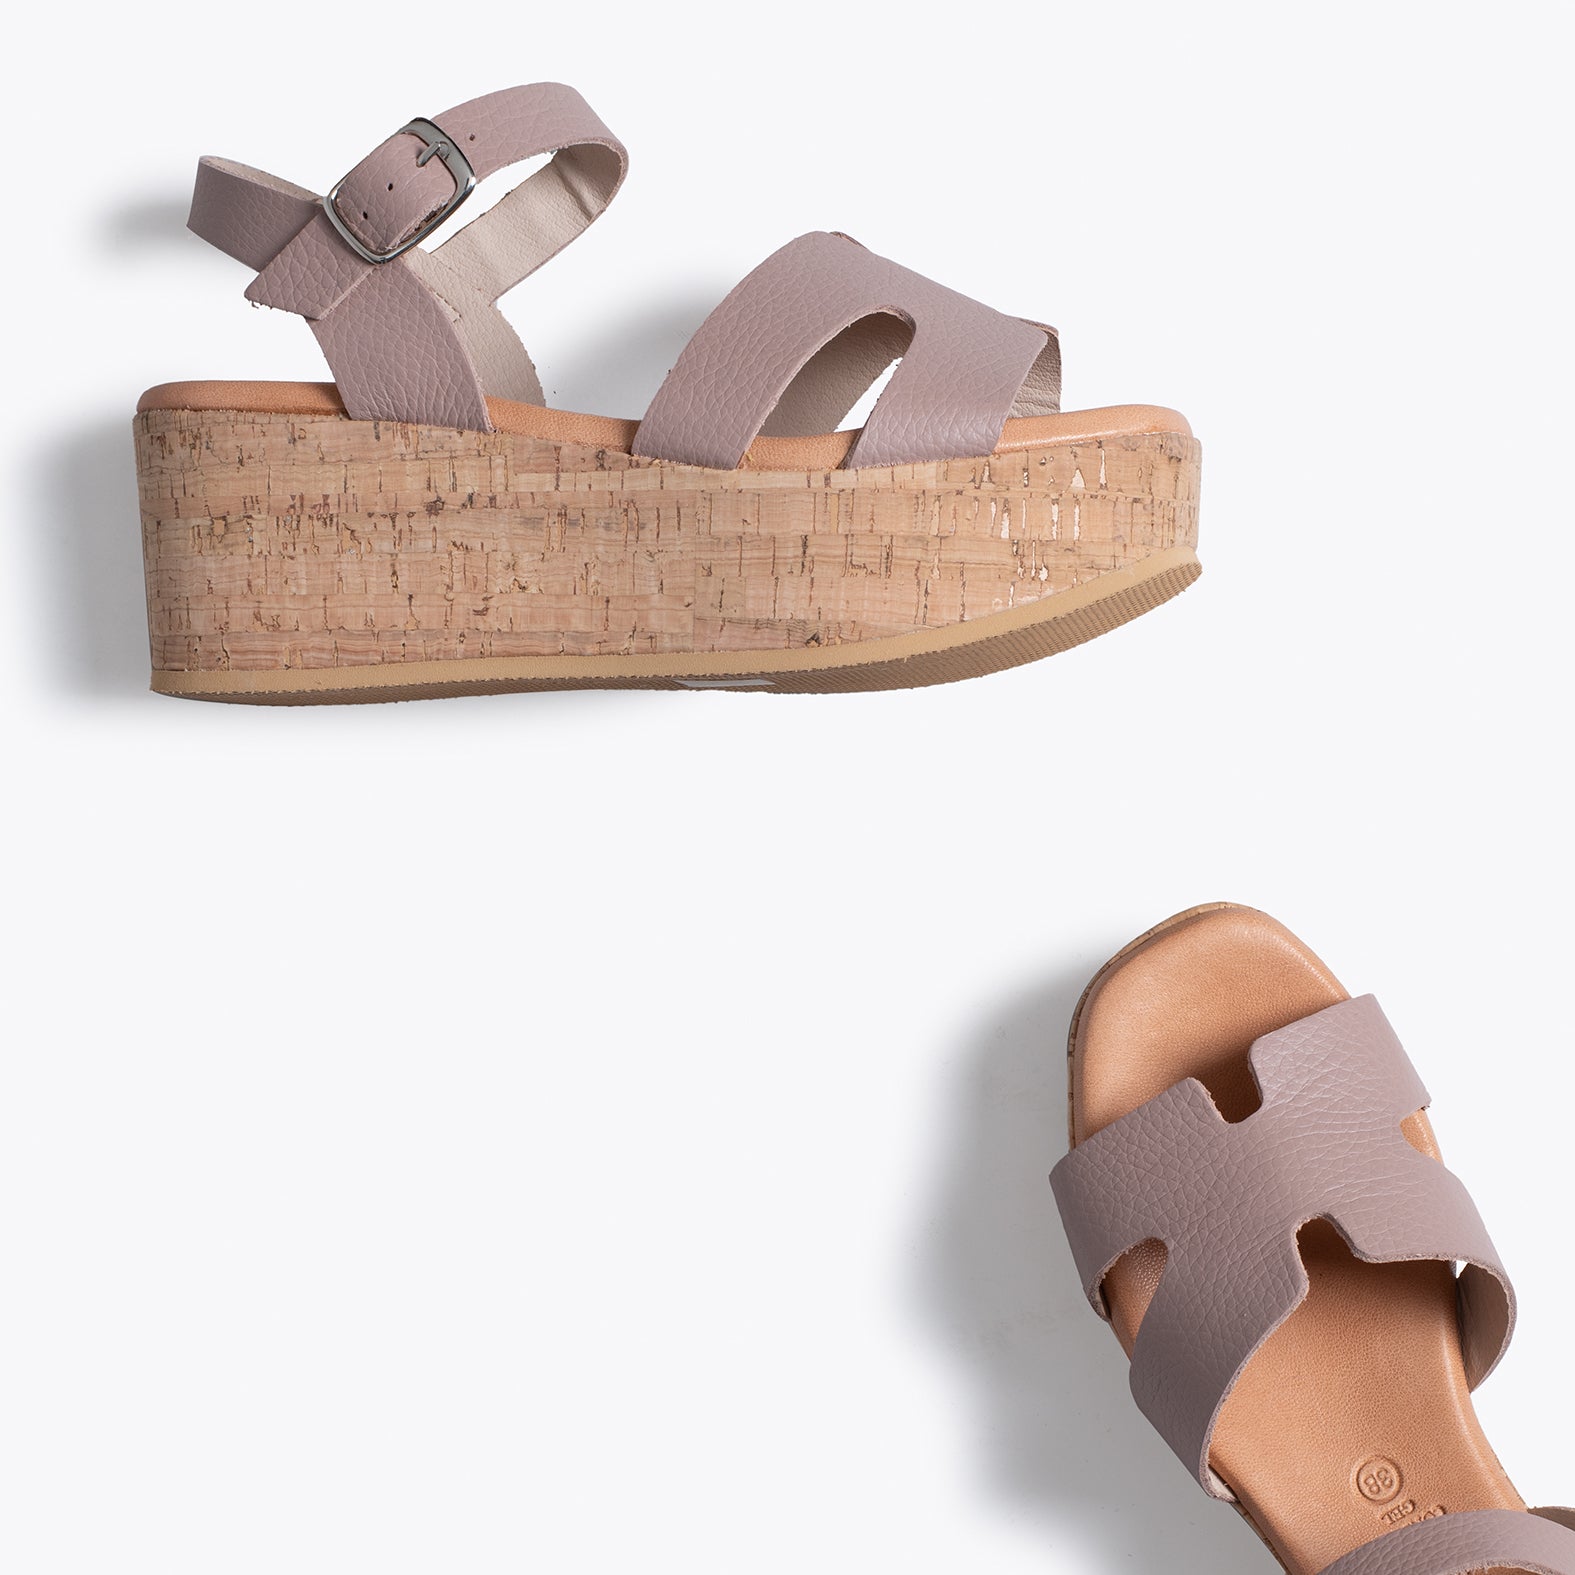 HACHE – PINK SANDAL WITH CORK WEDGE